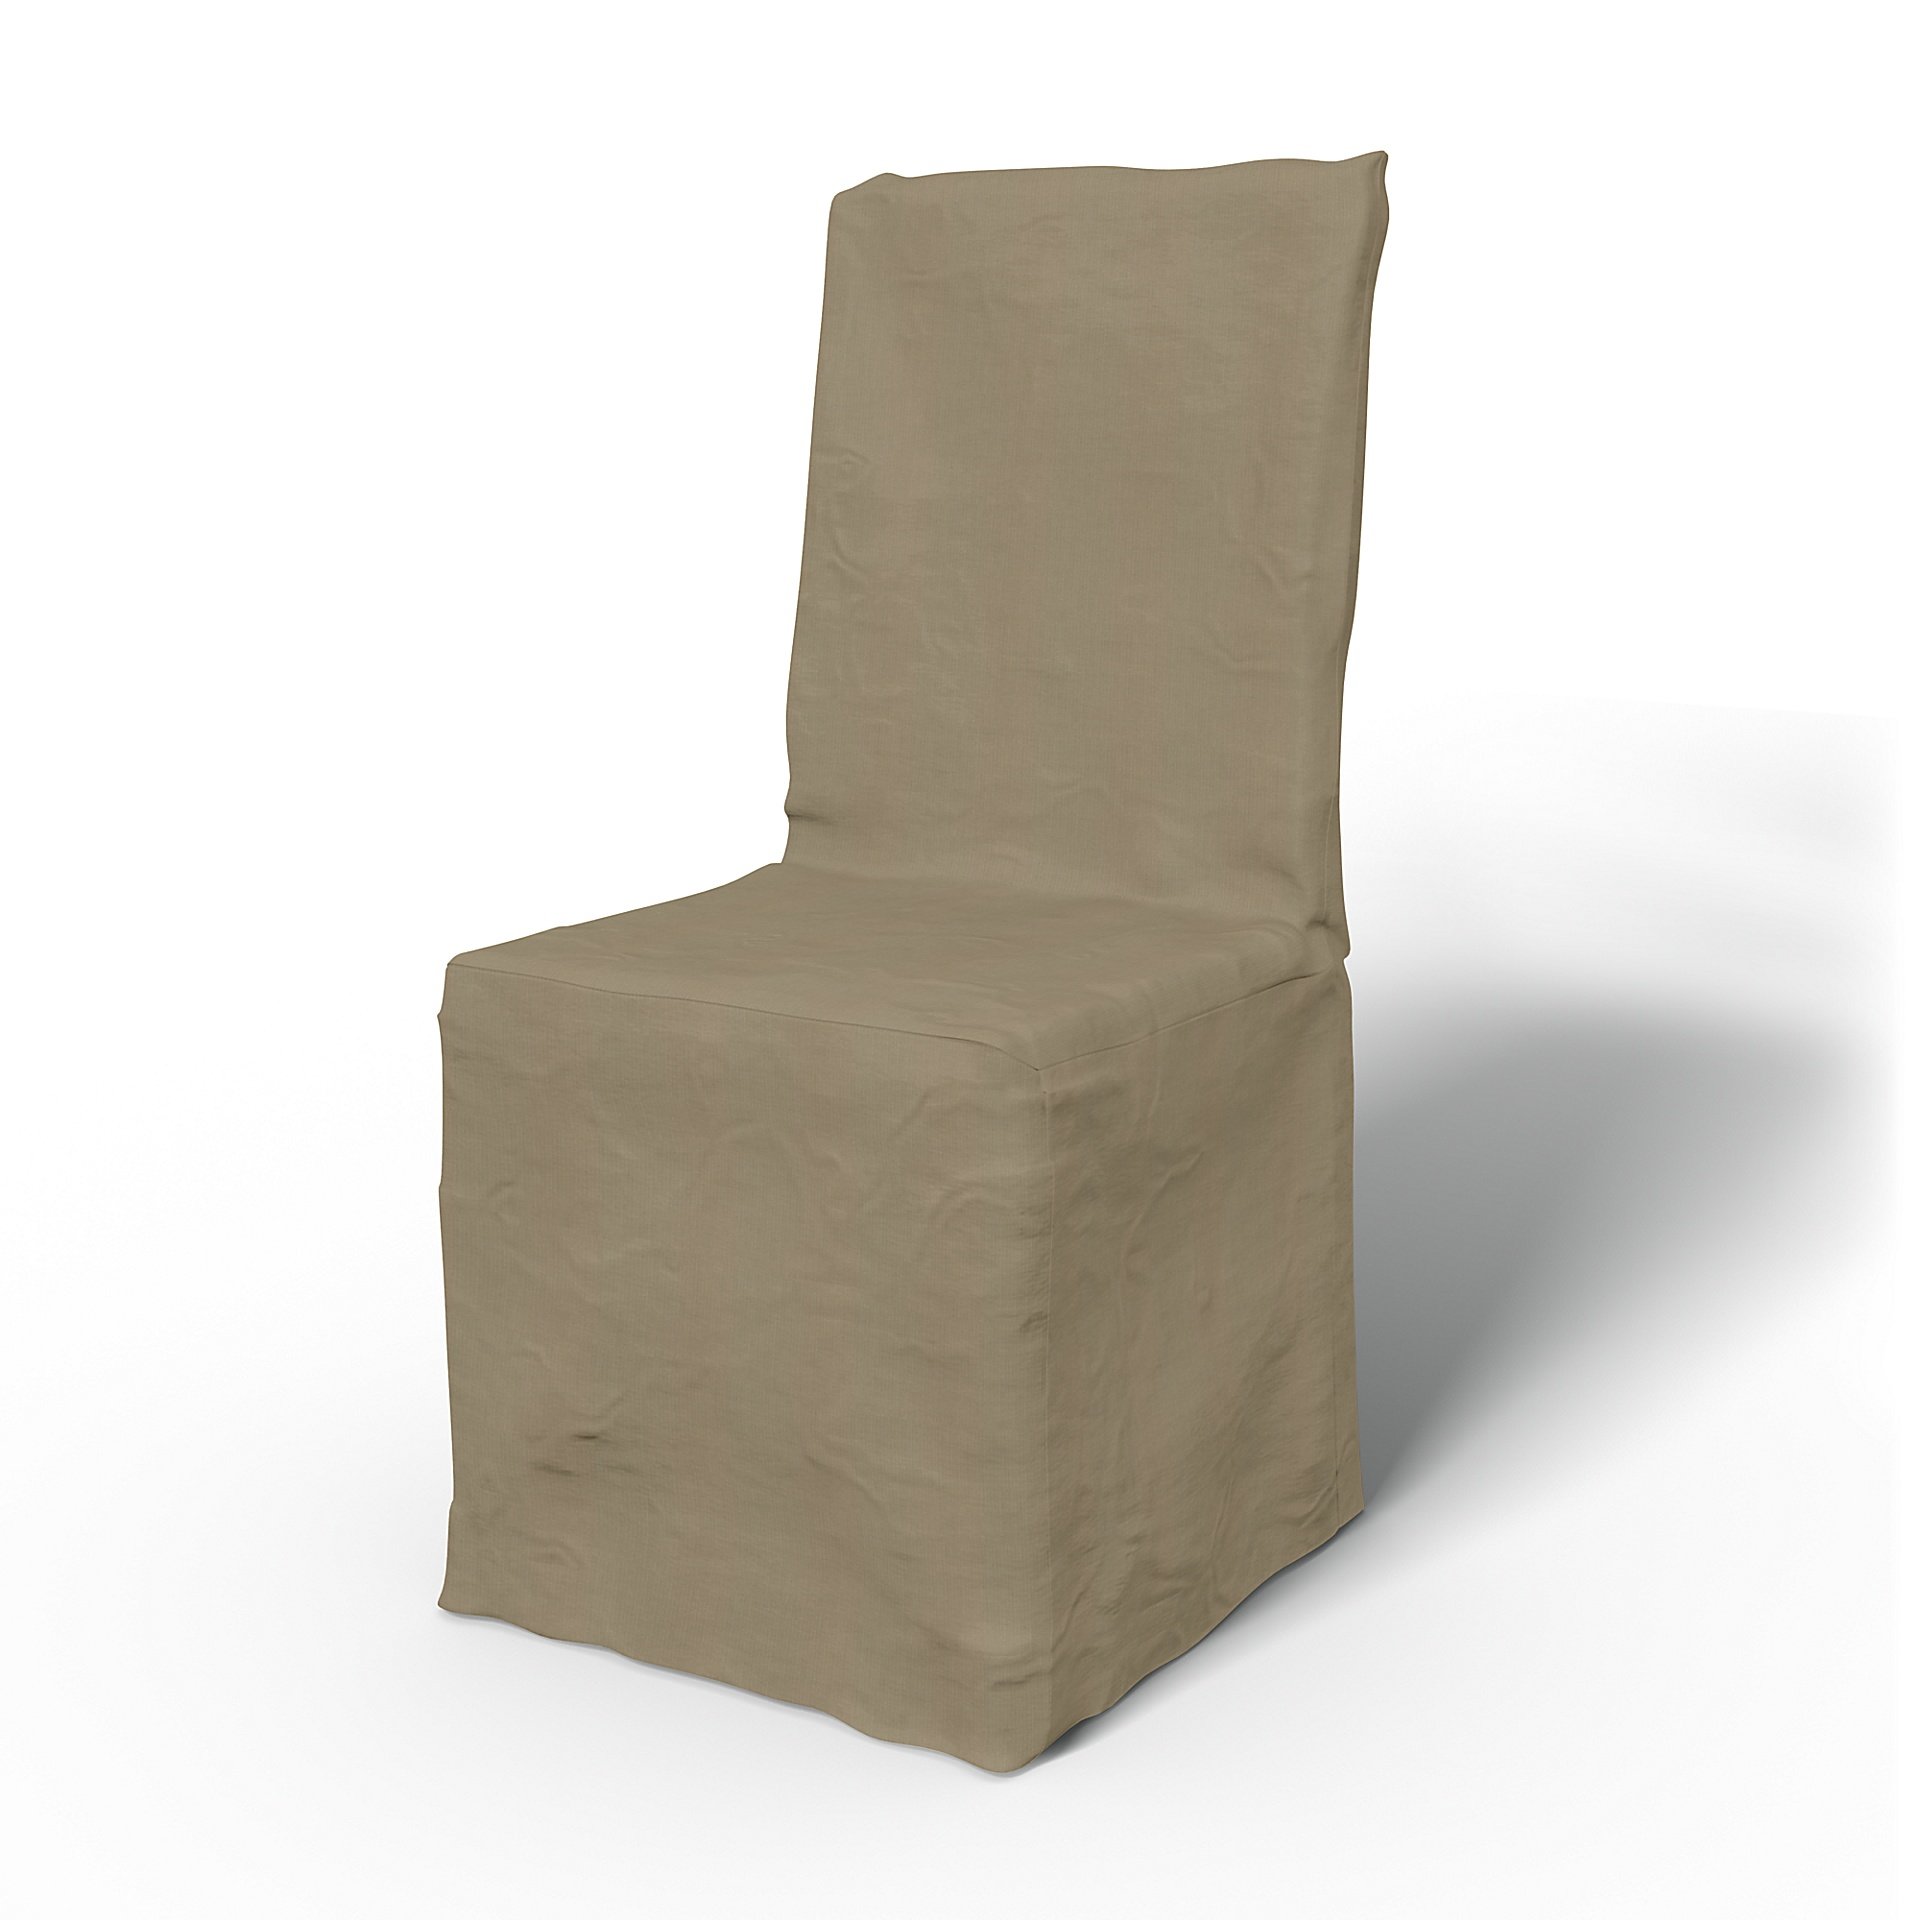 IKEA - Multi Fit Dining Chair Cover, Dark Sand, Outdoor - Bemz